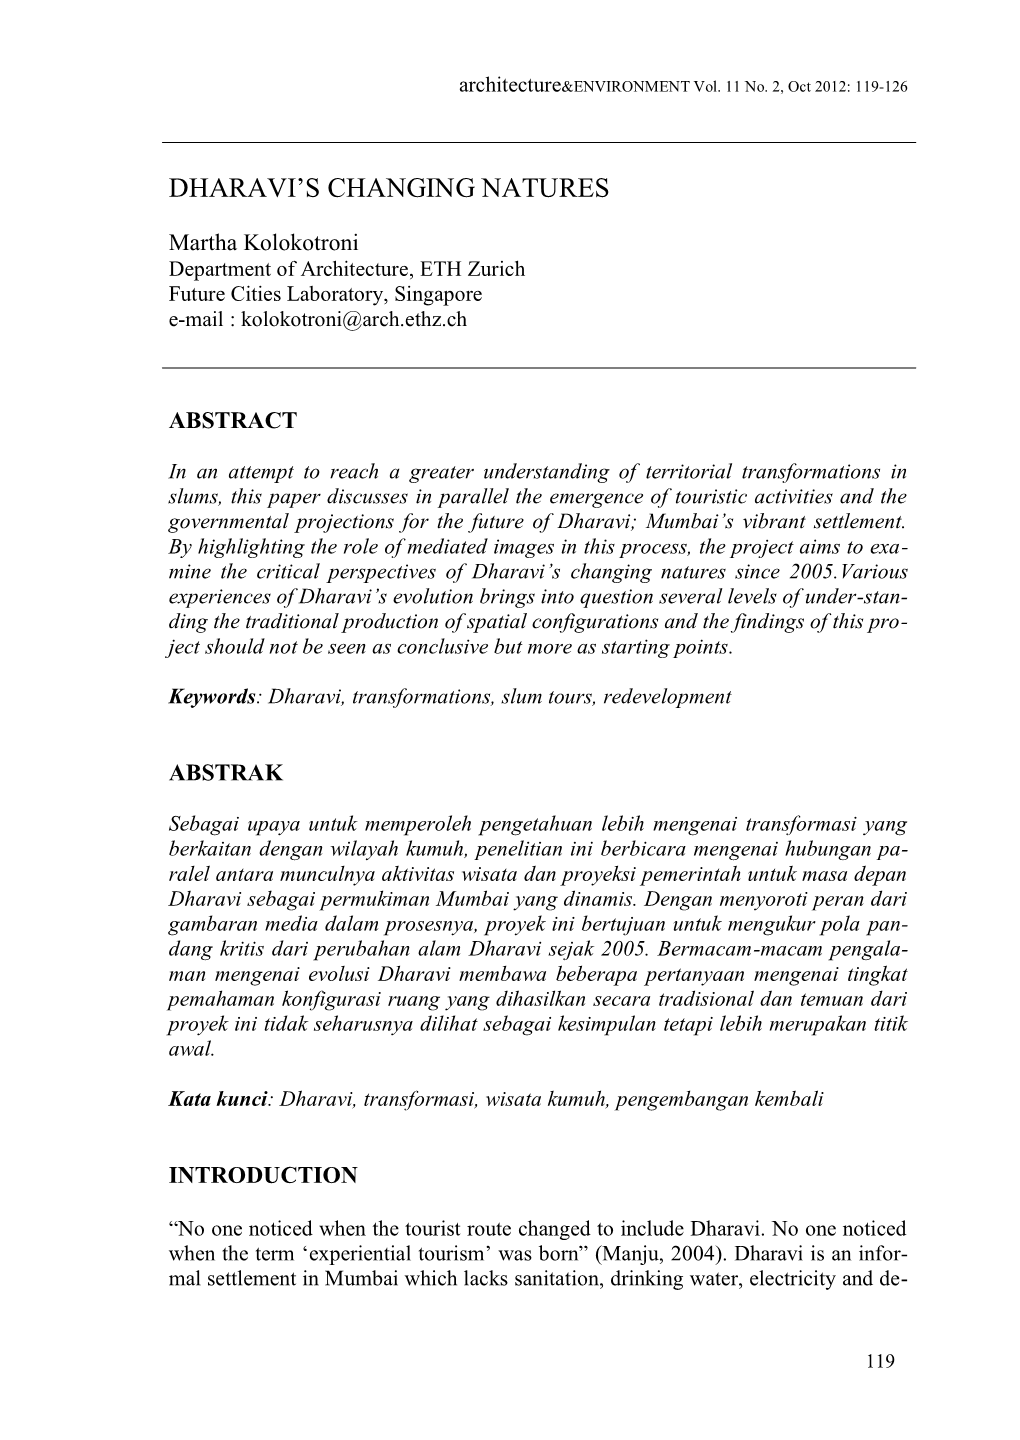 Journal of Architecture and Environment